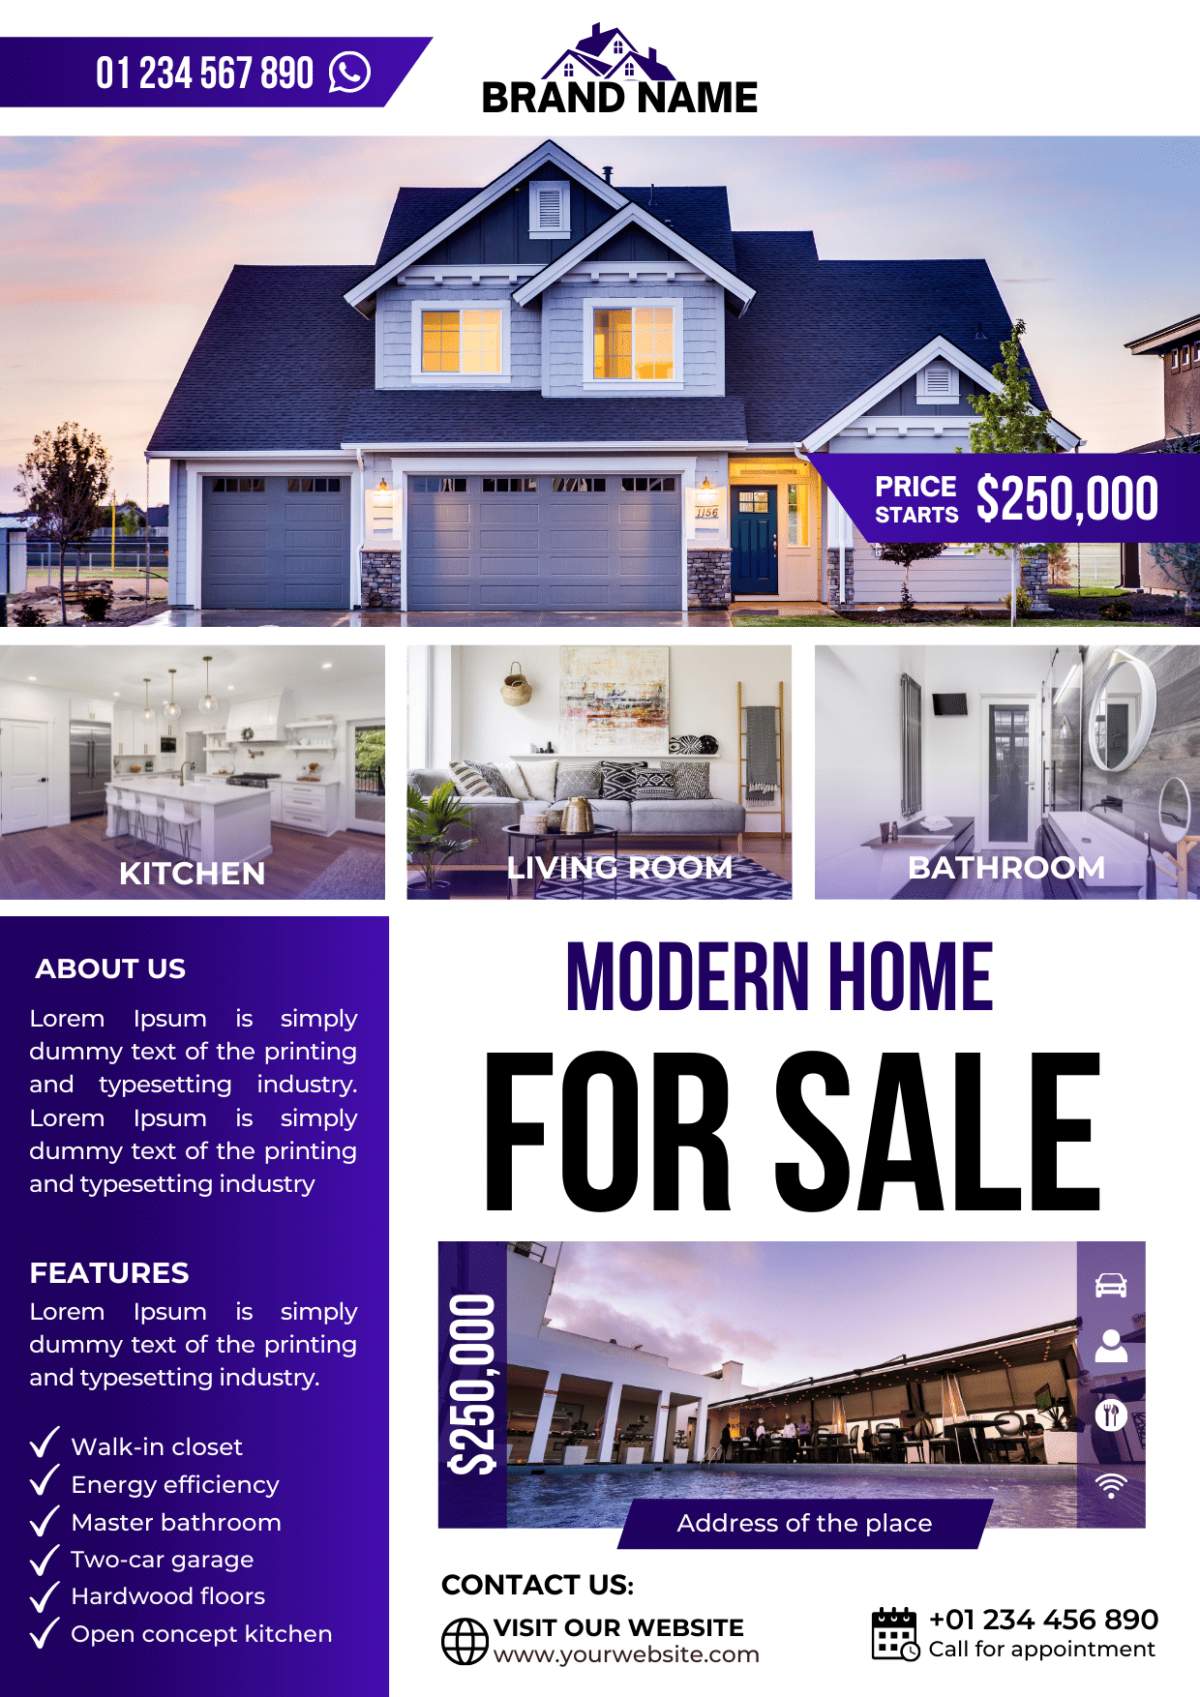 Dark purple gradient Real Estate Brochure/Poster Design Template. Apply to anyone in the real estate business, Interior Design, Hotels and Resorts, Furniture